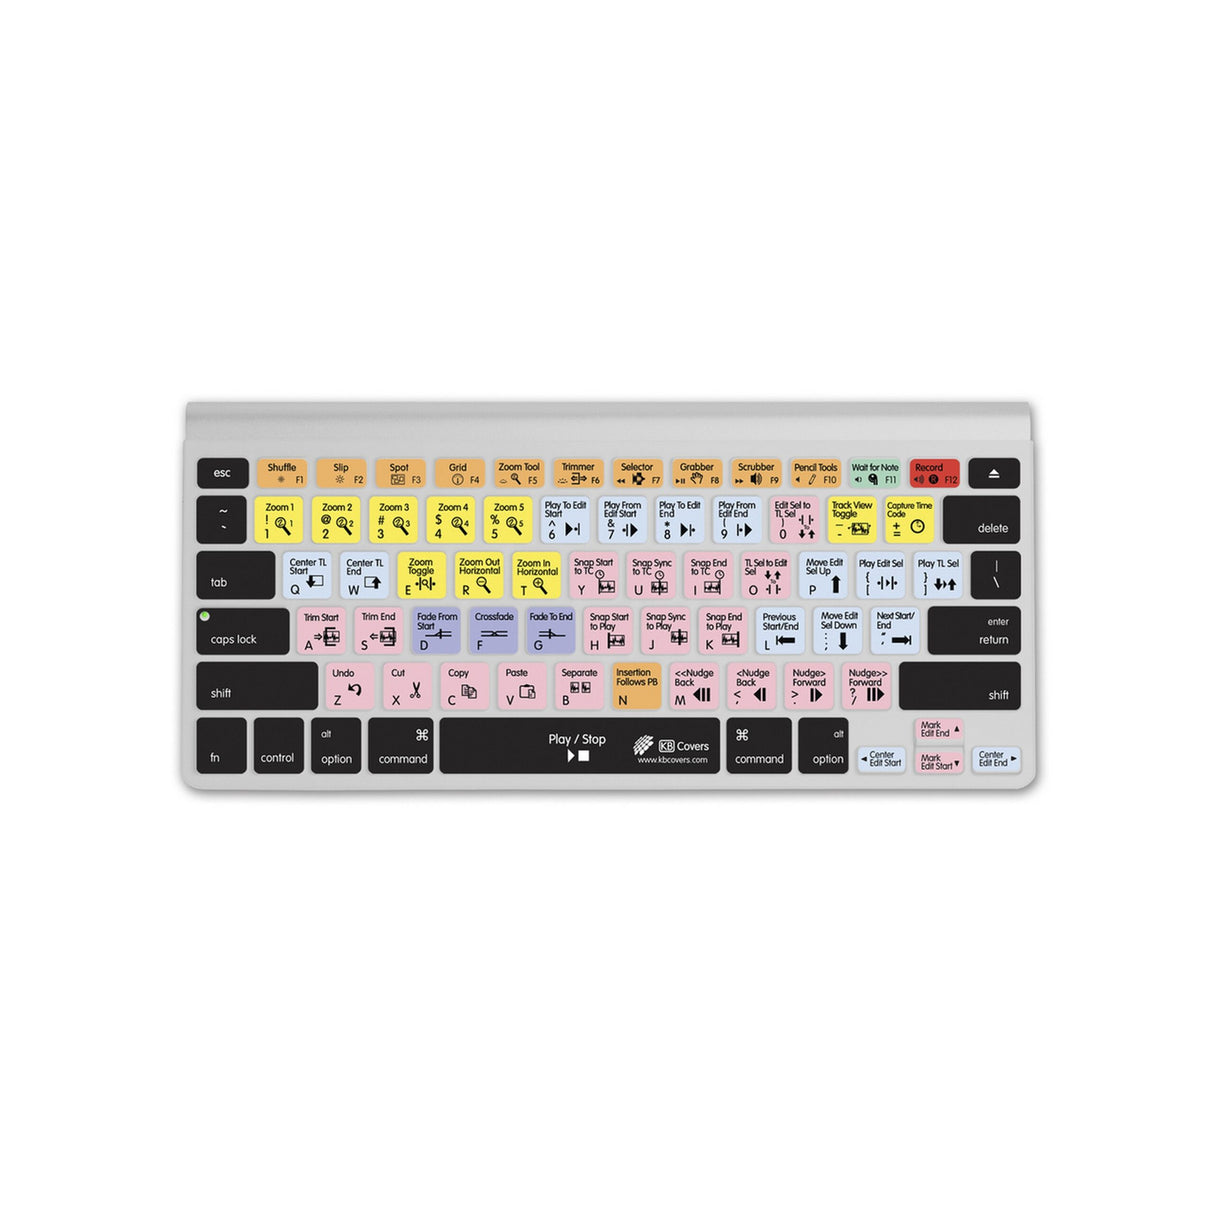 KB Covers PT-M-CC-2 Pro Tools Keyboard Cover for MacBook/Air 13/Pro 2008+/Retina and Wireless